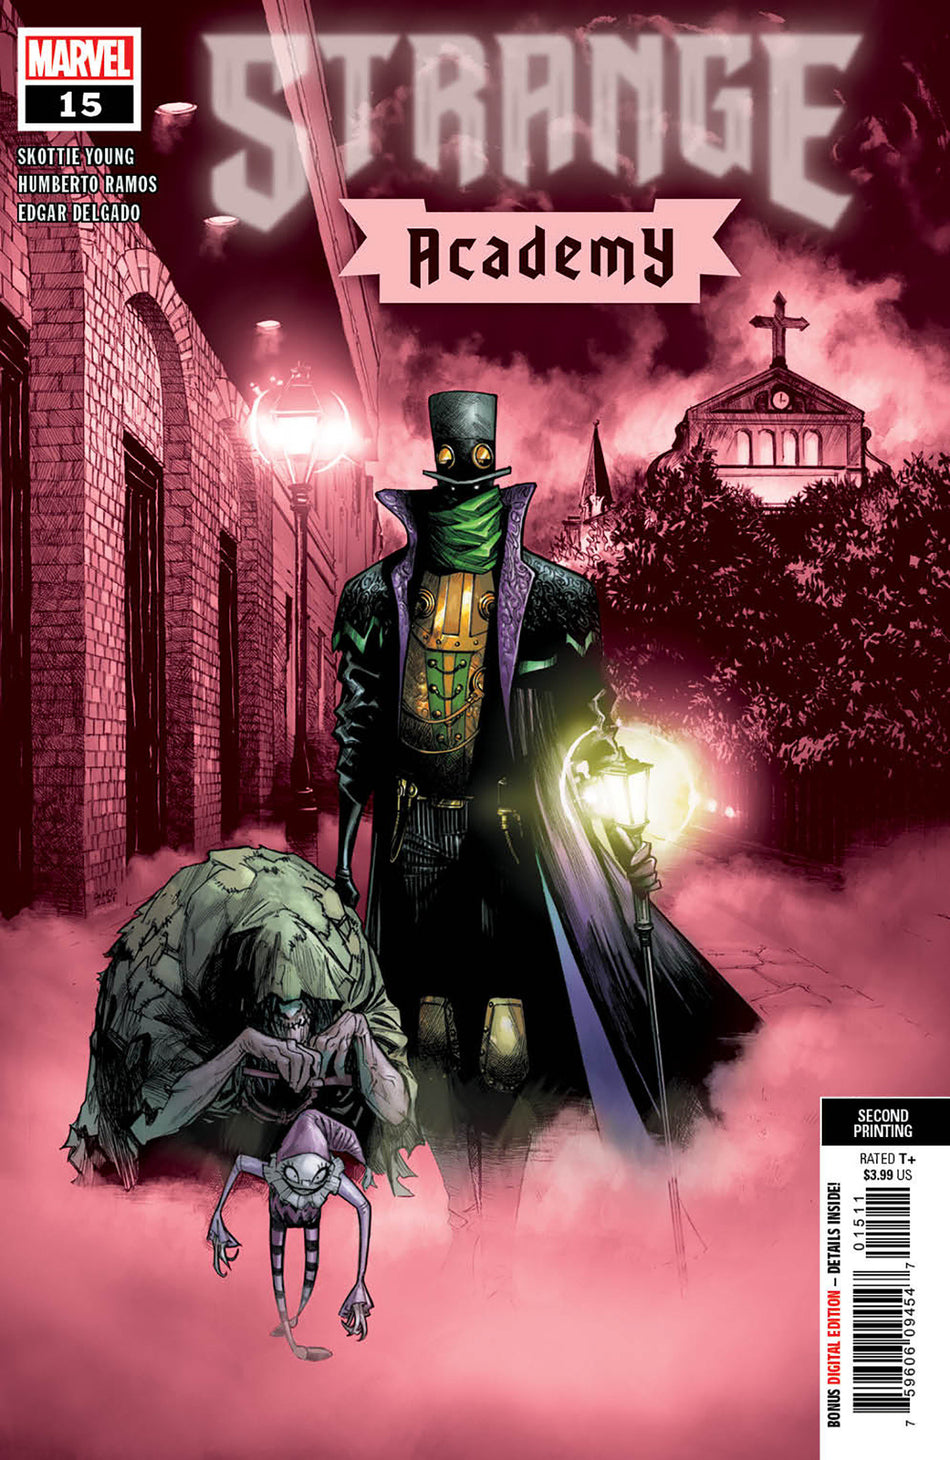 Image of Strange Academy 15 Ramos 2Nd Printing Variant comic sold by Stronghold Collectibles.